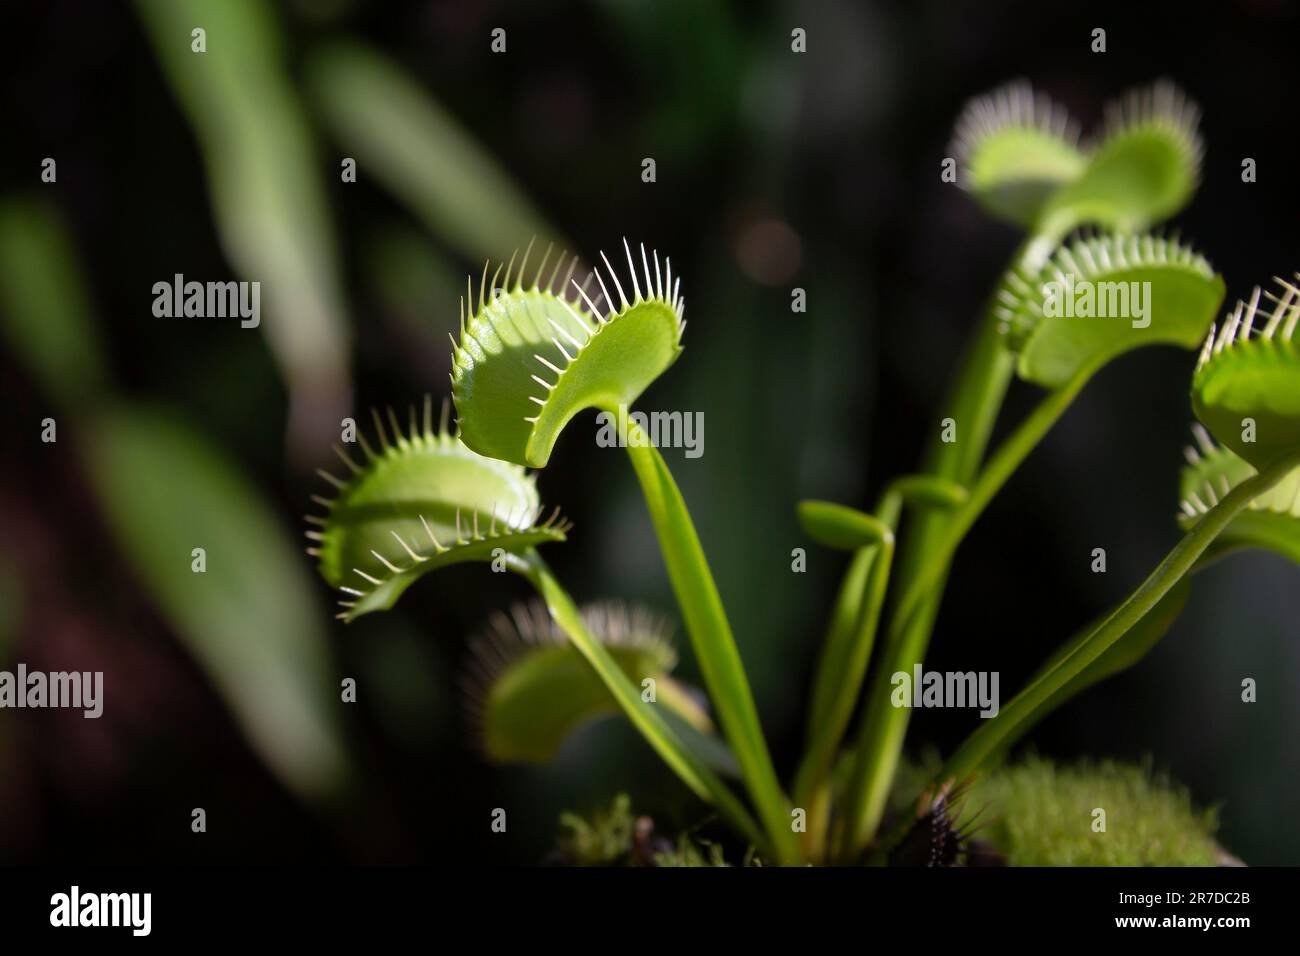 Image of carnivorous plant, (Dionaea muscipula) called Venus FlyTraps, insectivorous plant native to subtropical wetlands highly coveted as an ornamen Stock Photo